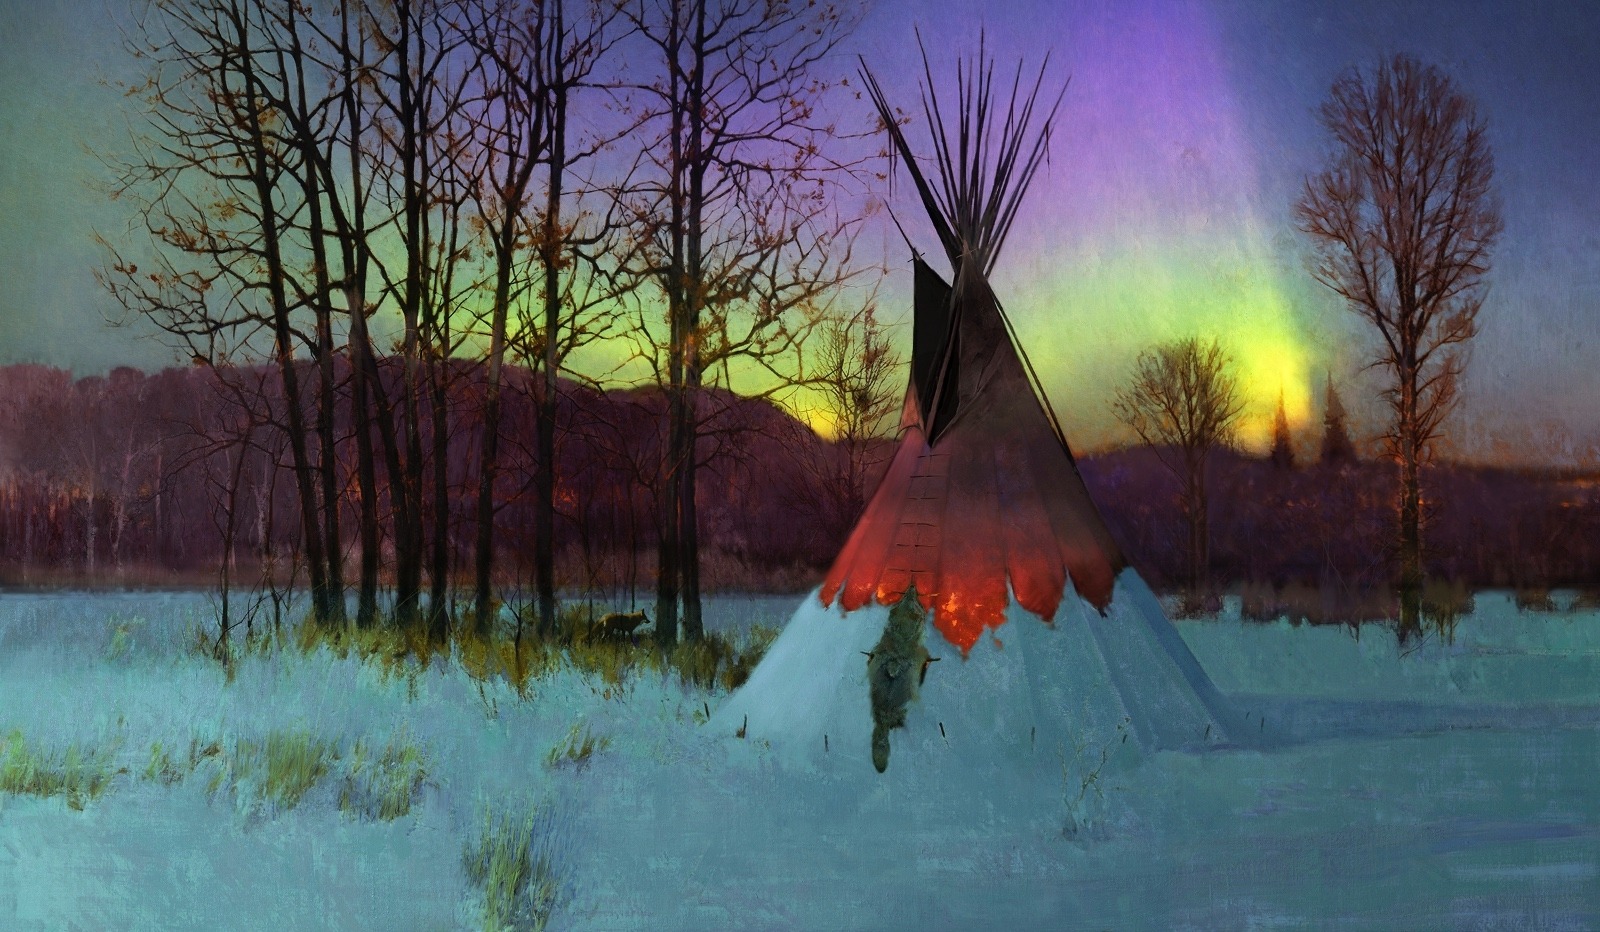 &quot;Hungry Fox Equinox,&quot; a painting by R. Tom Gilleon. &quot;During winter,&quot; Gilleon says, &quot;many plains tribes referred to the season as the time of the hungry moon.&quot; Painting used with the artist's permission. To see more of Gilleon's work, go to tomgilleon.com 